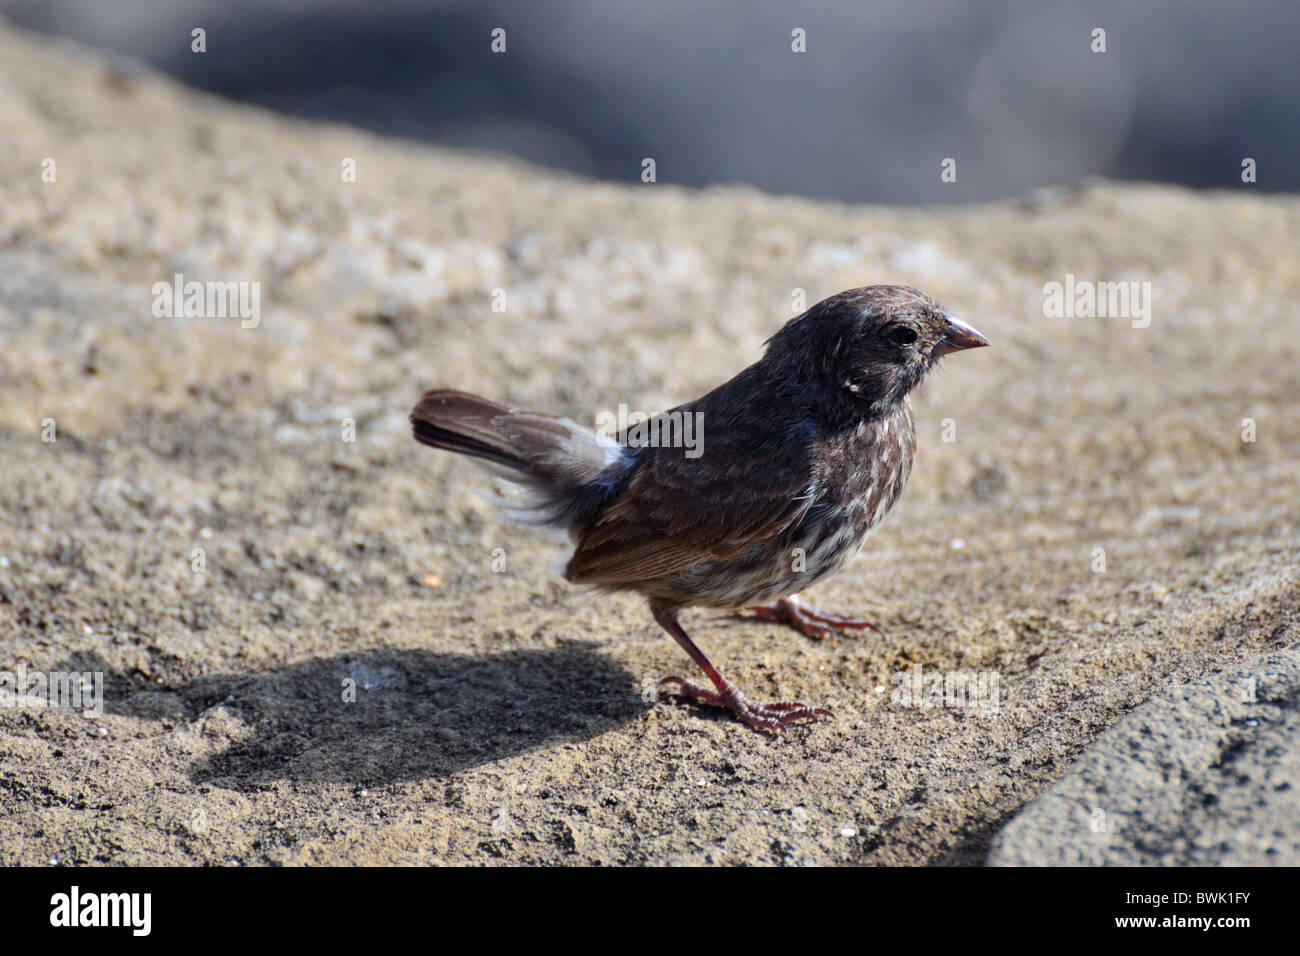 Small Ground Finch Stock Photo